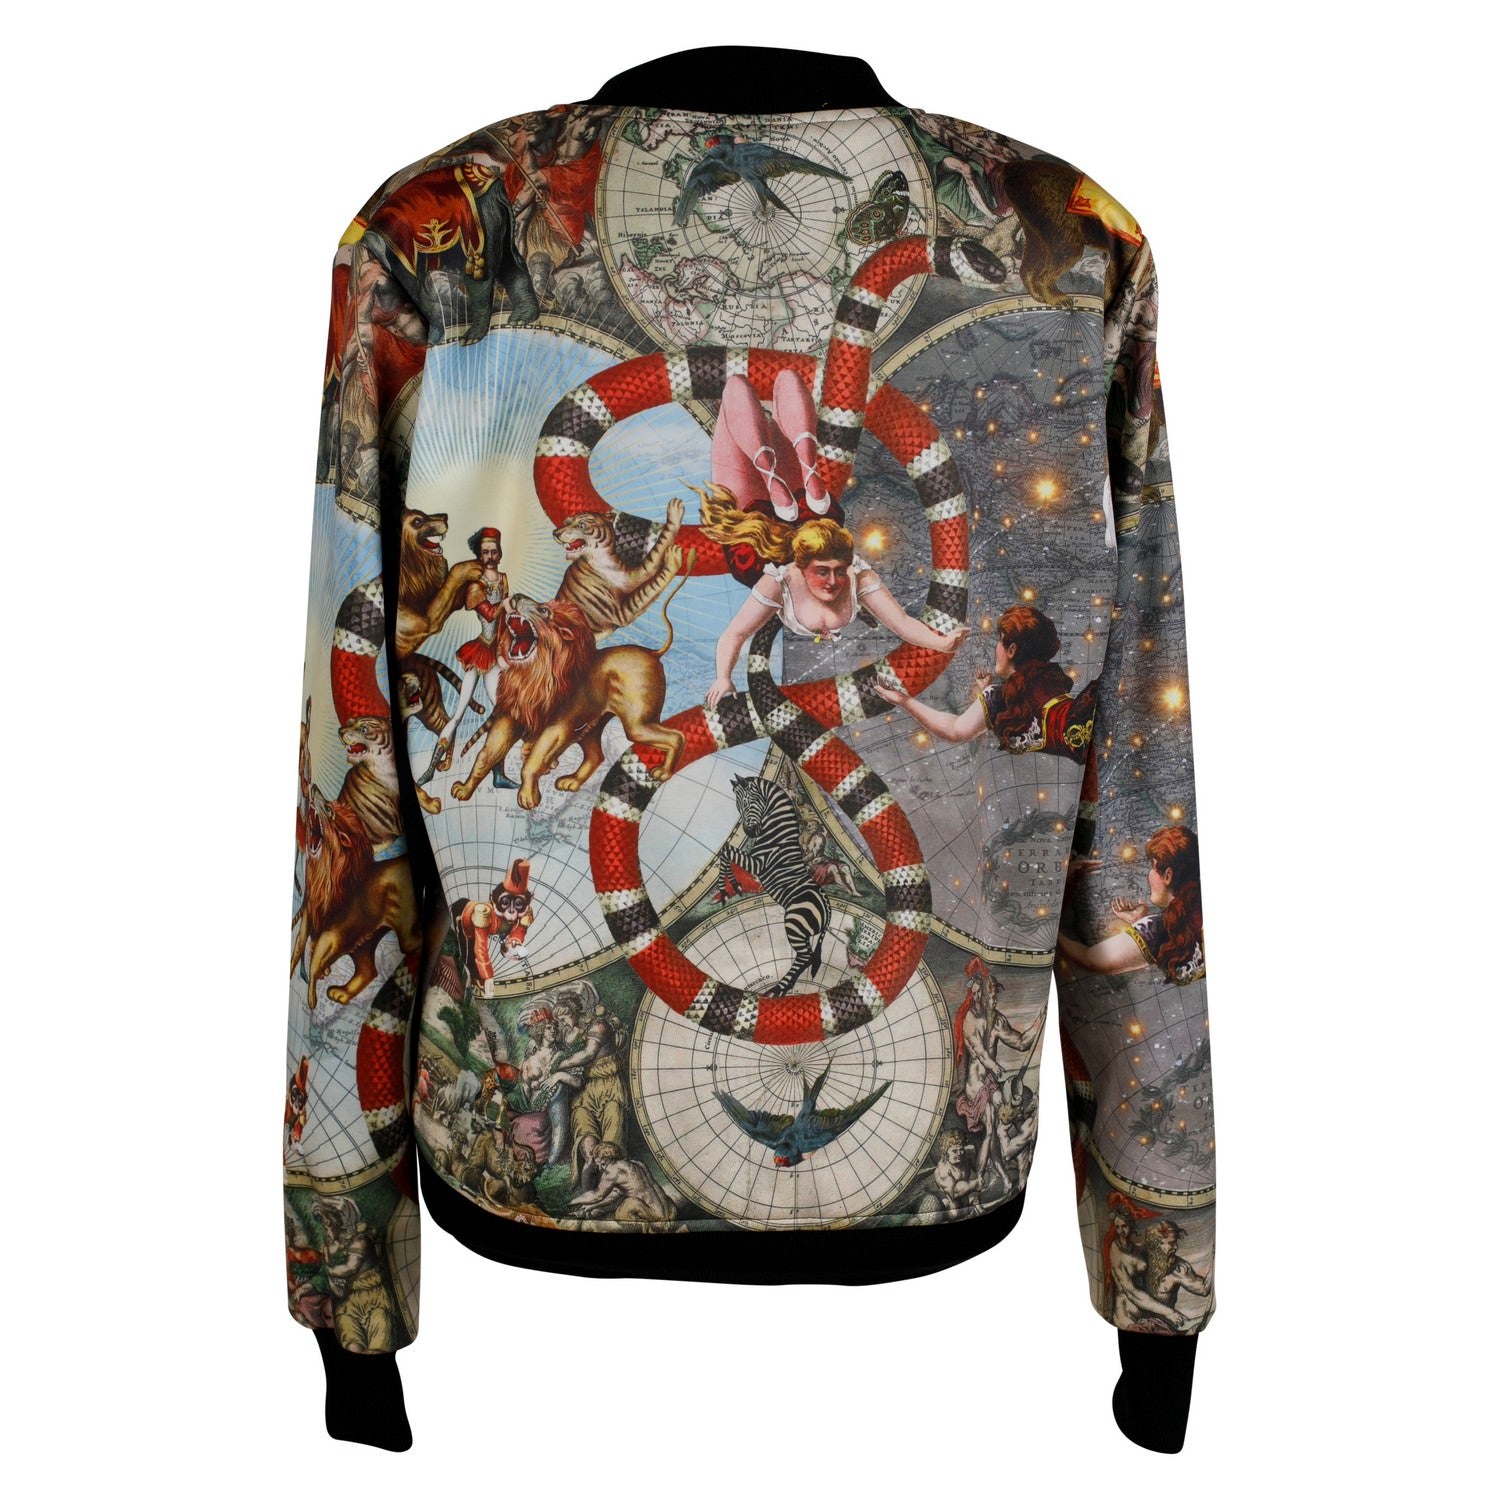 Back view of luxury softshell bomber jacket in a maximalist Circus inspired design